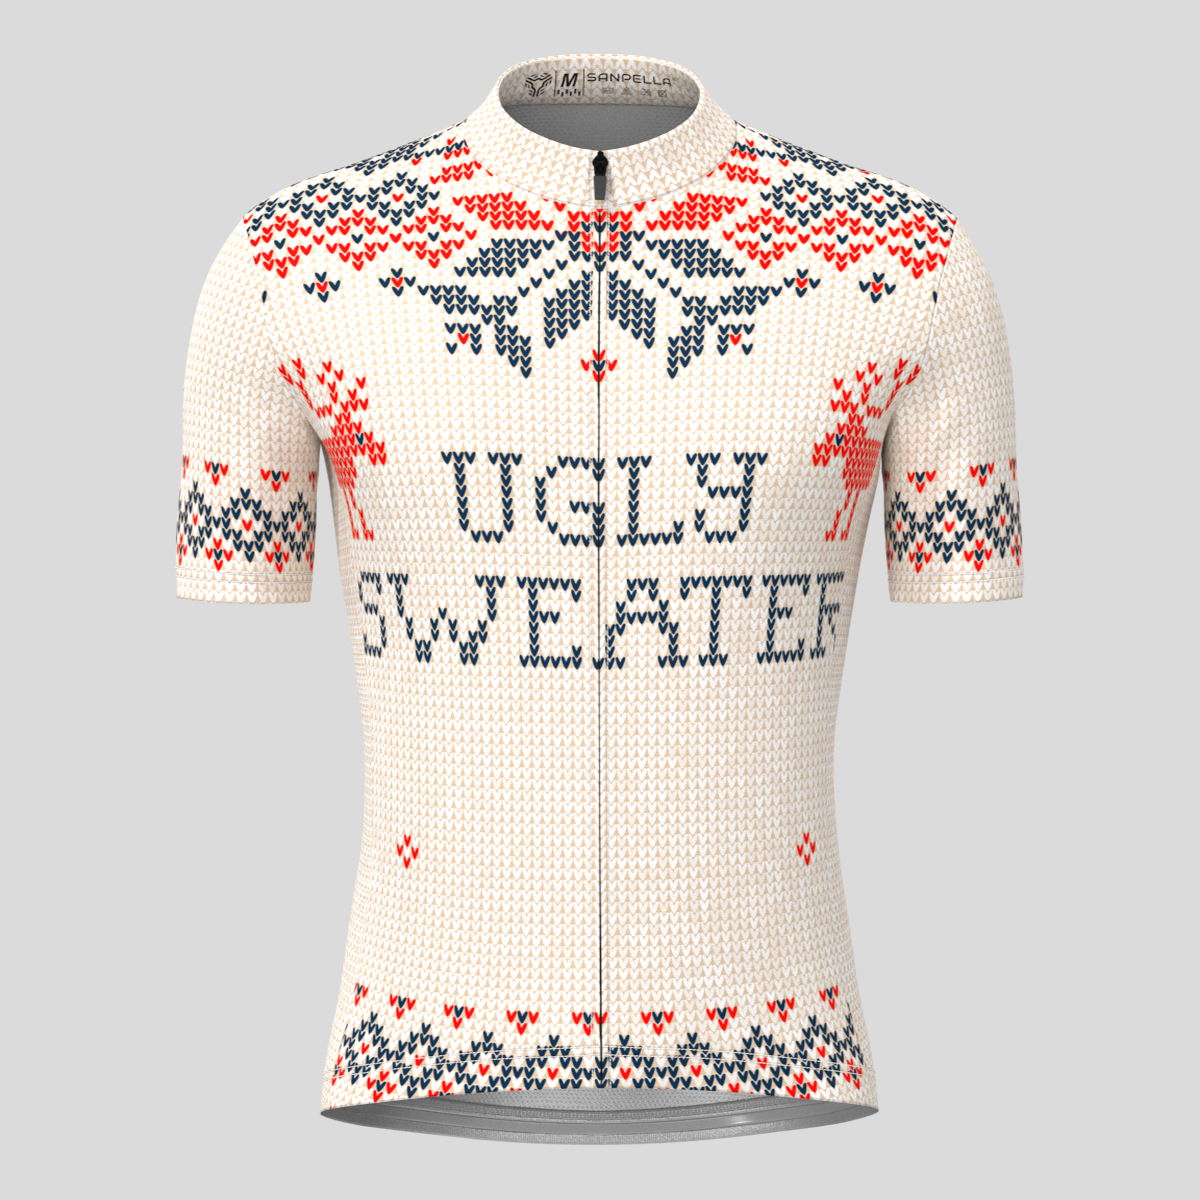 XMAS Ugly Sweater Themed Men's Cycling Jersey - Beige